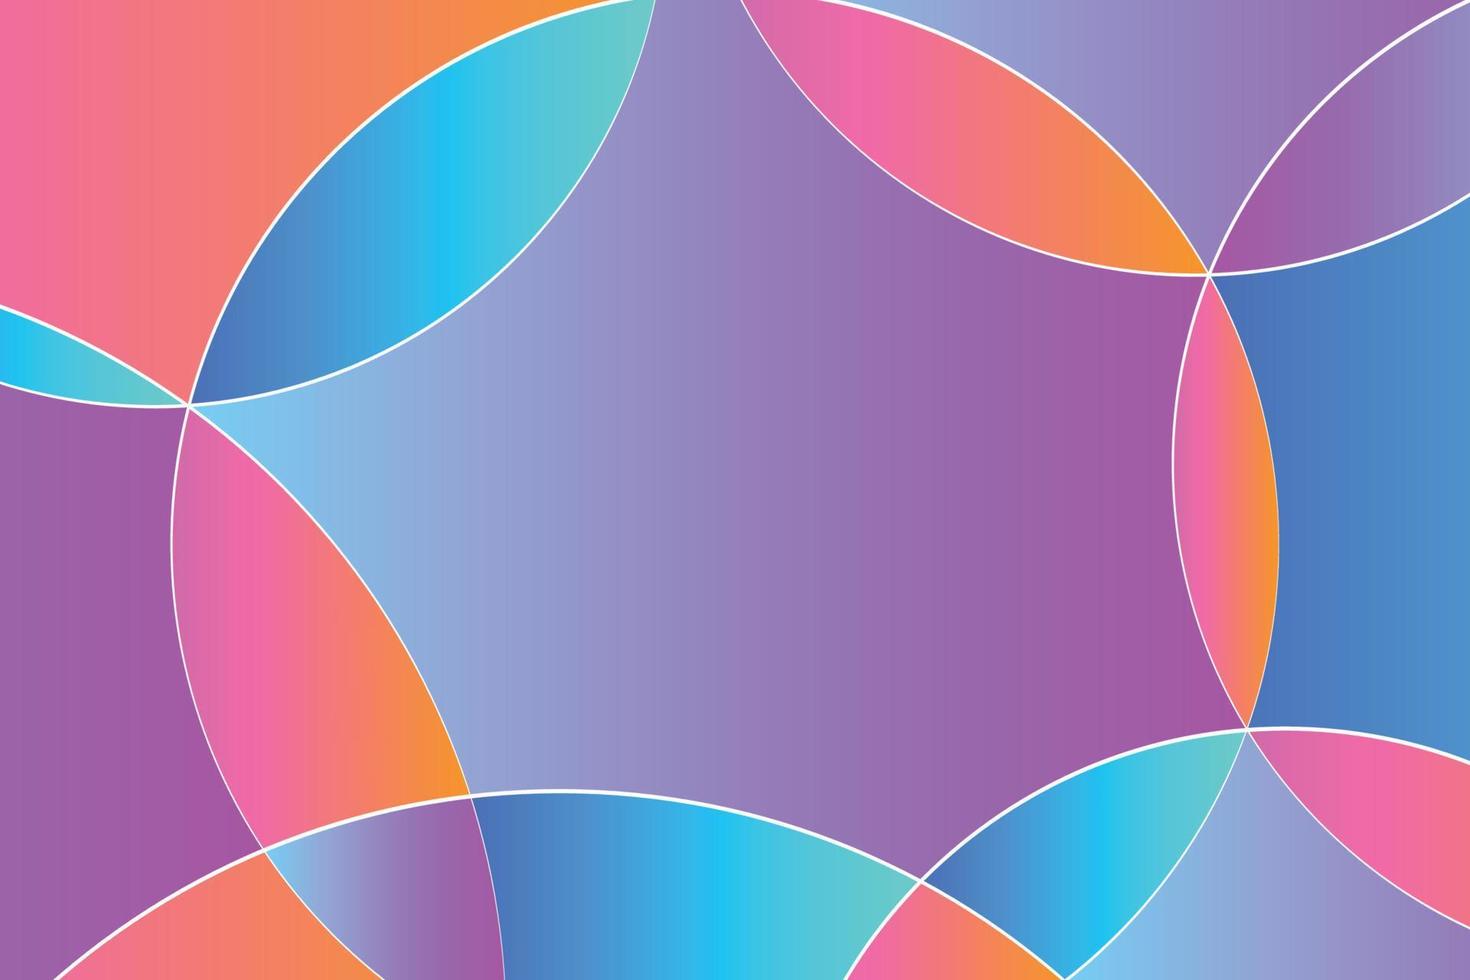 Vivid liquid round shape design illustration. Abstract bright holographic circle background vector